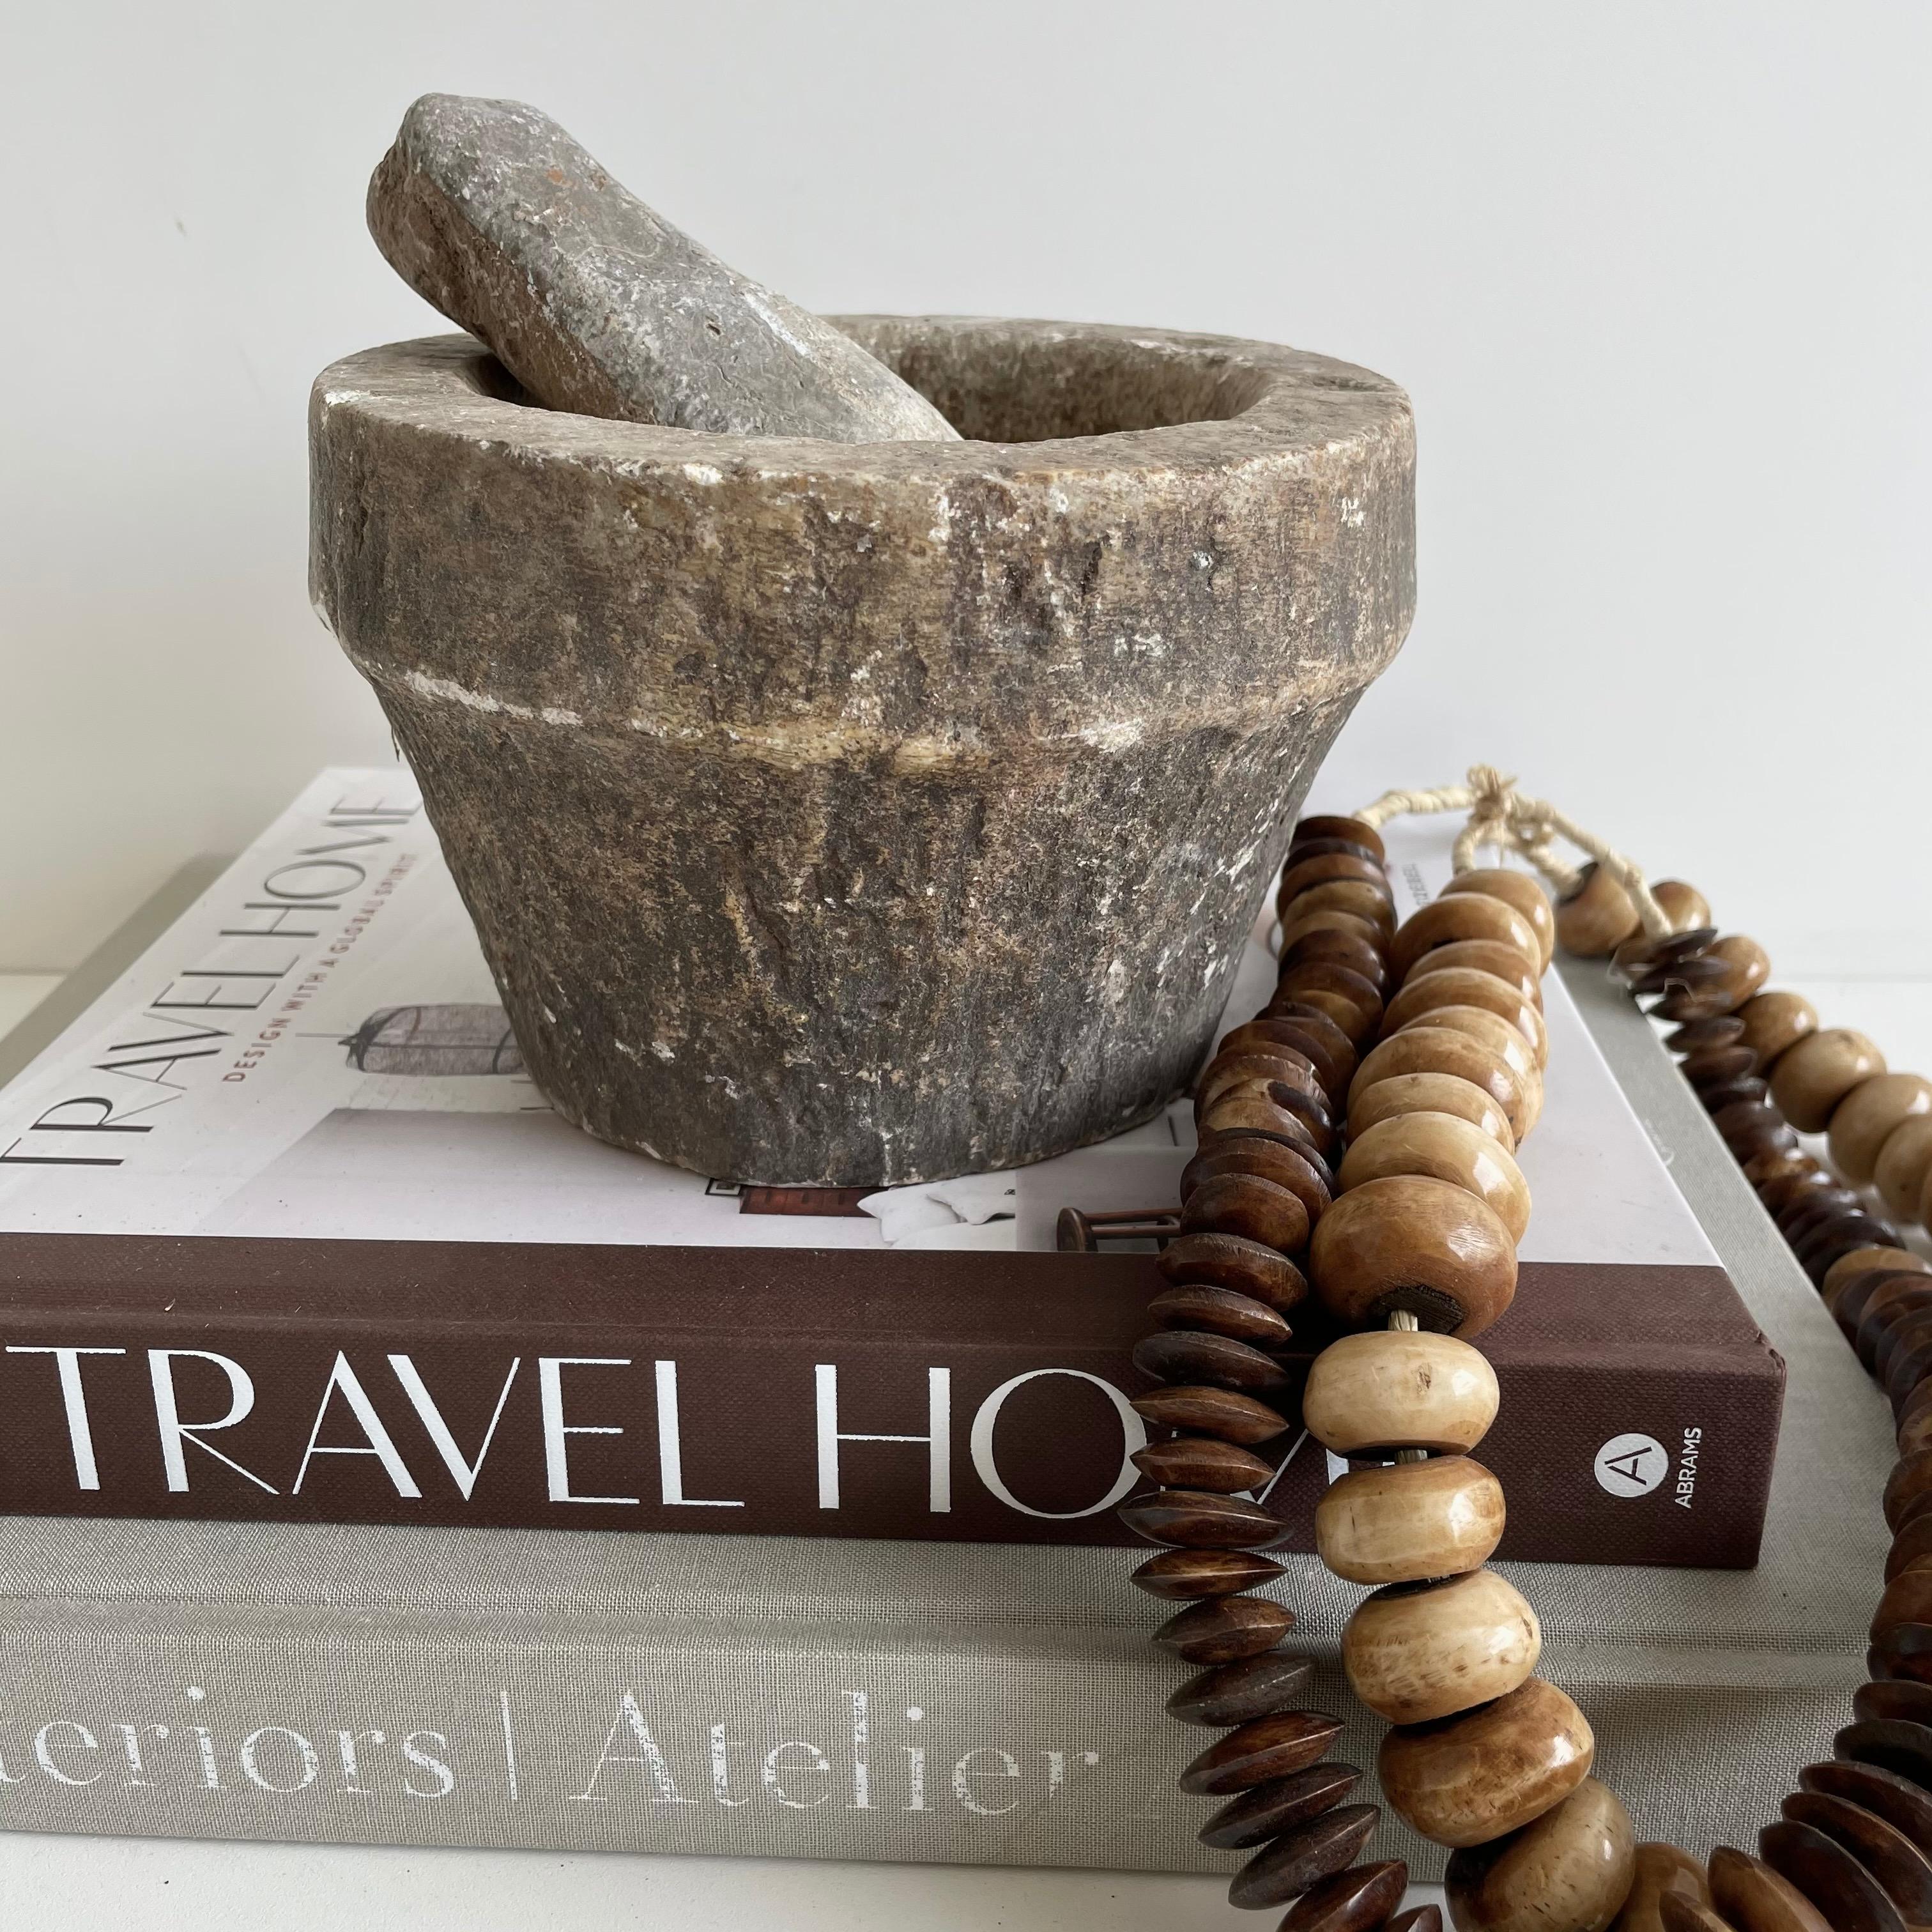 Antique stone mortar and pestle bowl set.

Antique stone mortar and pestle bowl set, great decorative item, or can be used.
Accessories not included
Size: 6.5 x 6.5 x 5.